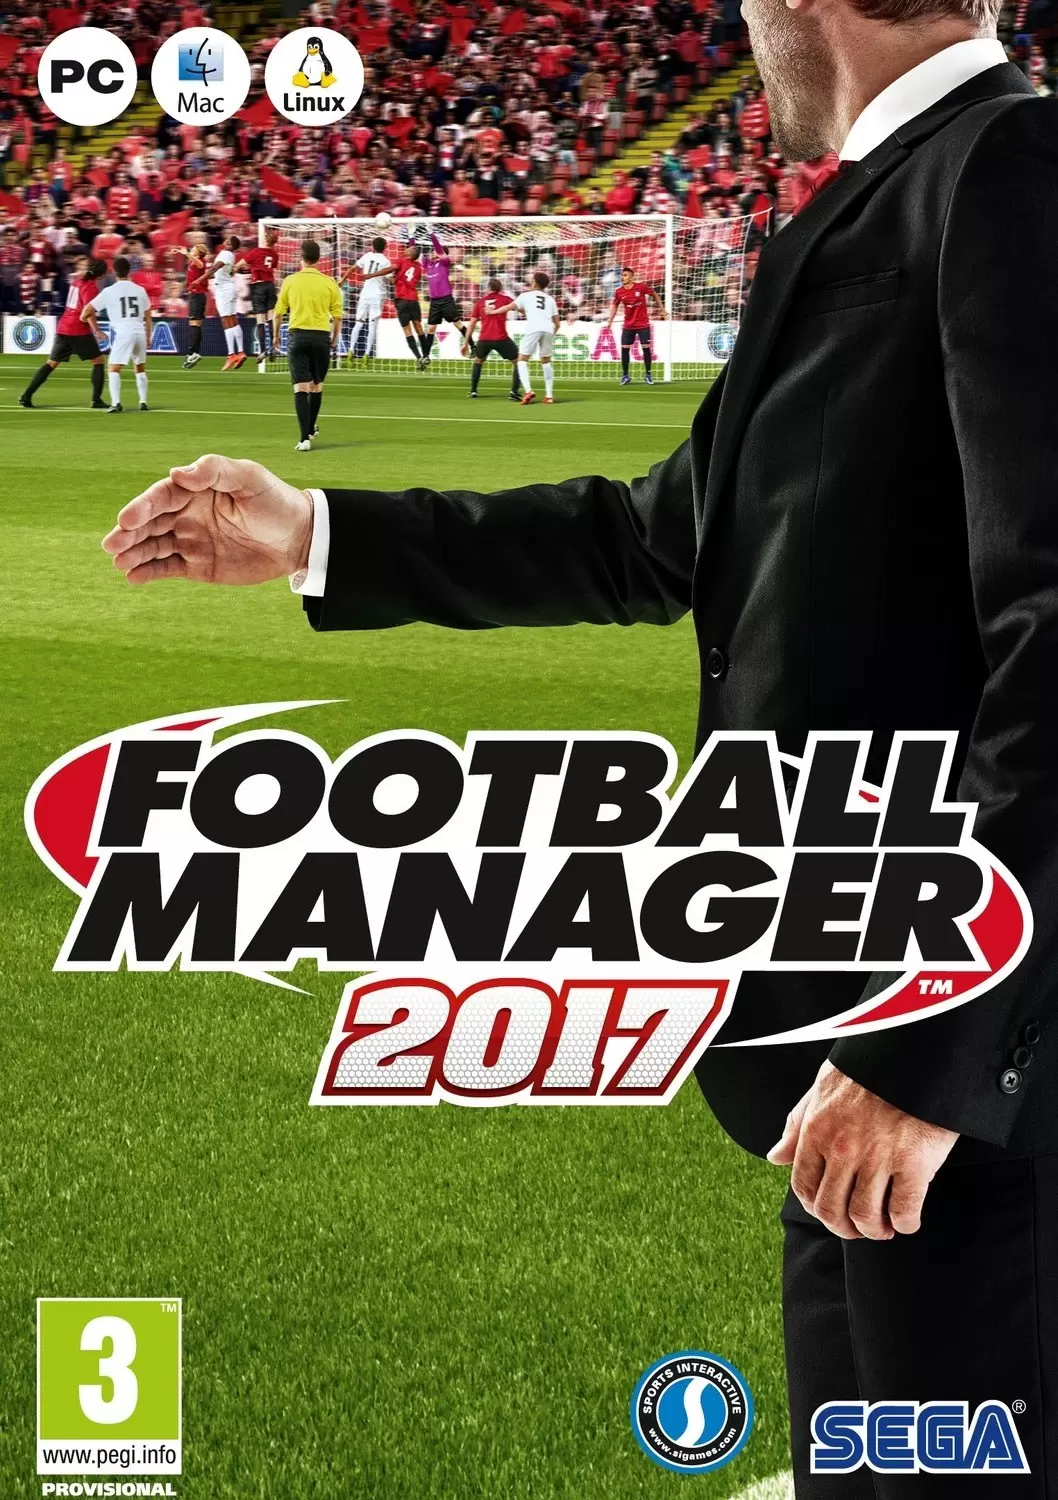 PC Games - Football Manager 2017